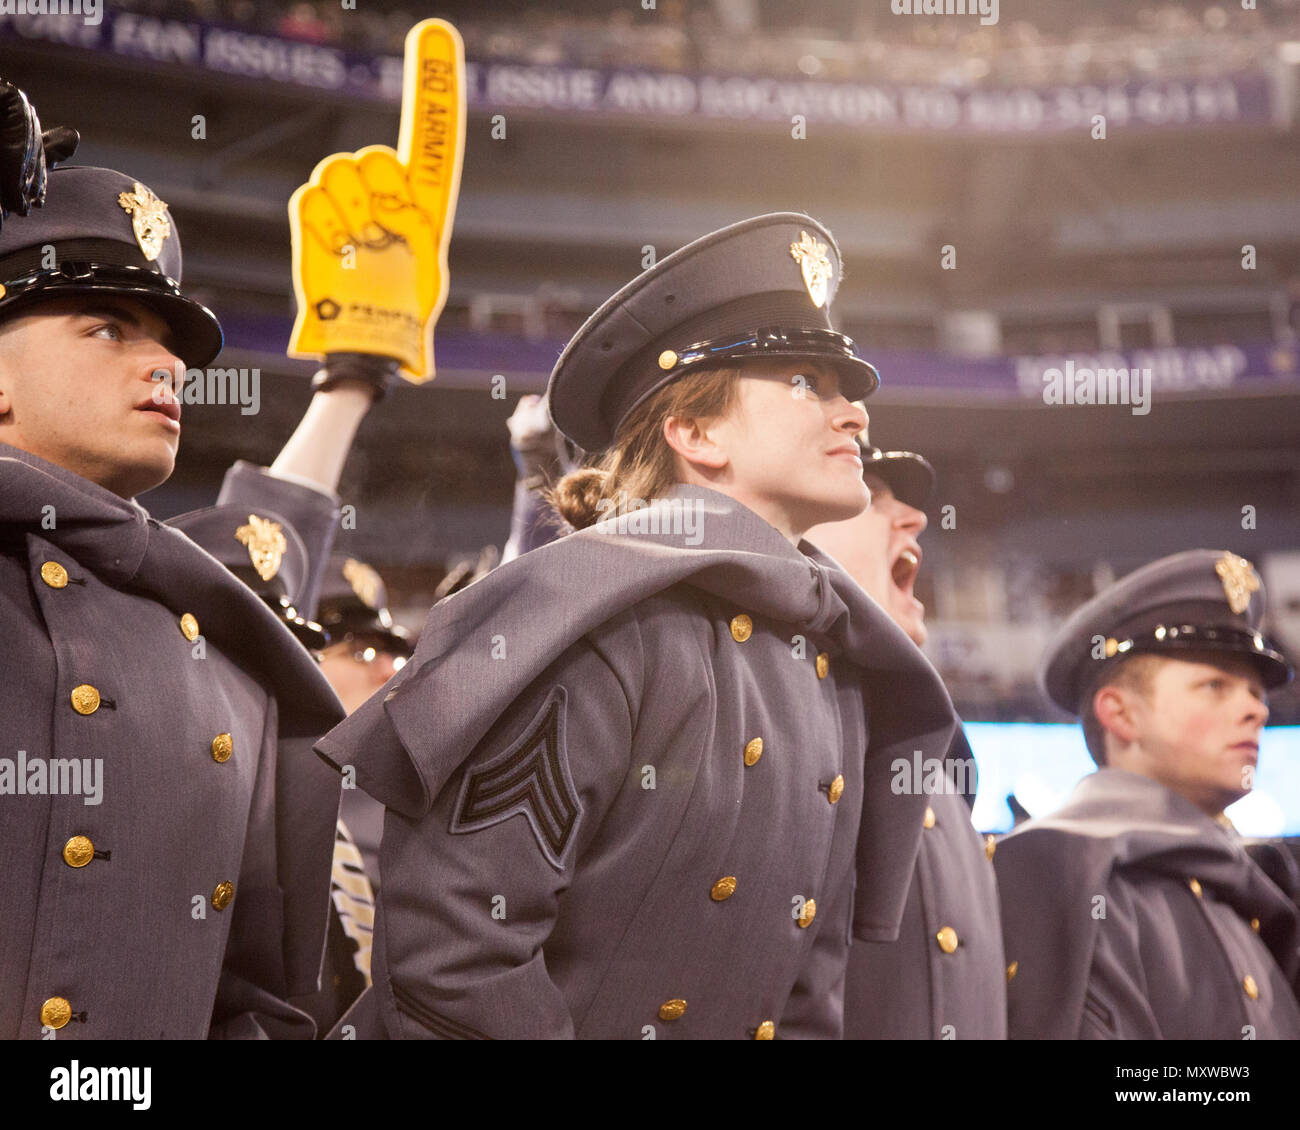 U.S. Military Academy cadets cheer during the 117th Army Navy Game at M&T  Bank Stadium in Baltimore on Dec. 10, 2016. Army West Point Football  defeated the U.S. Naval Academy 21-17 snapping